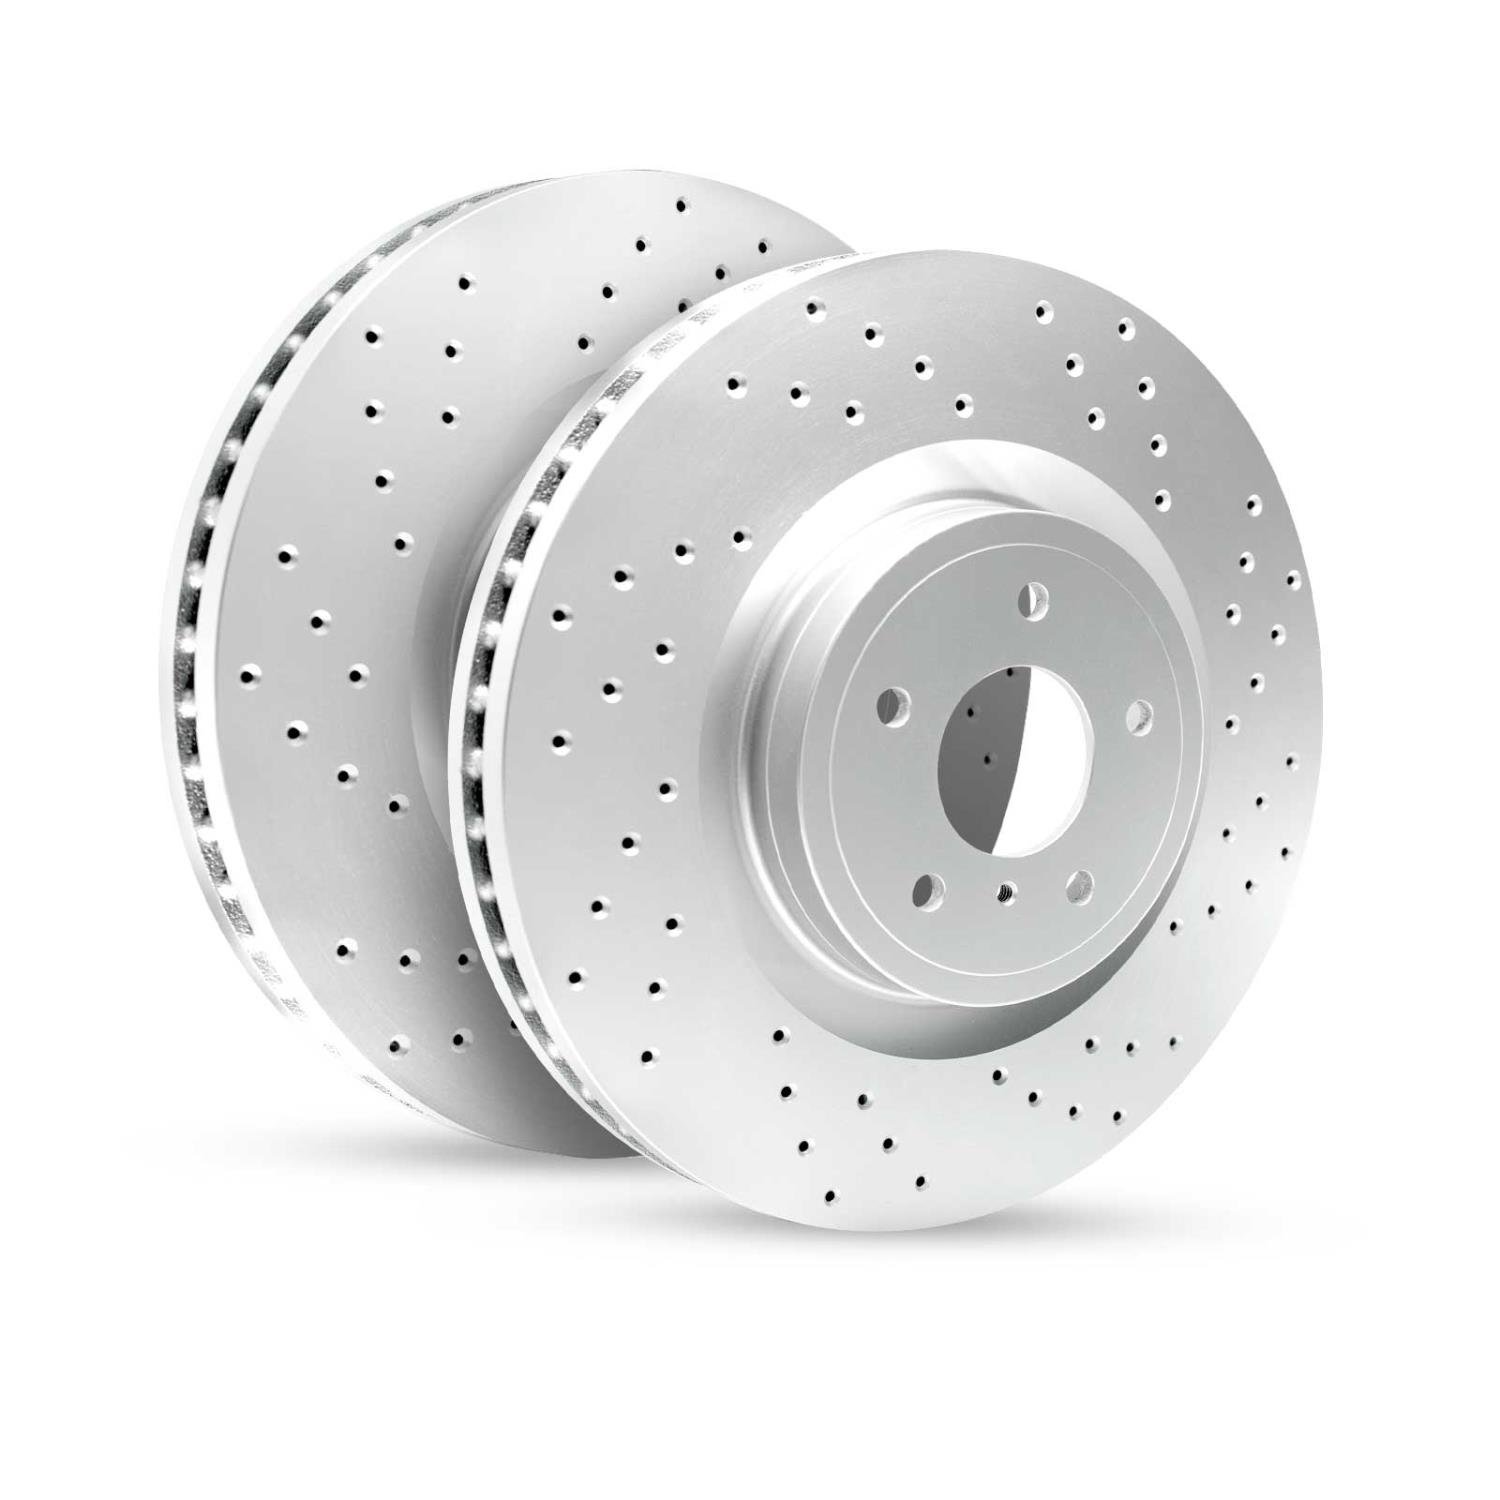 GEO-Carbon Drilled/Slotted Rotors, 2017-2020 Fits Multiple Makes/Models, Position: Rear